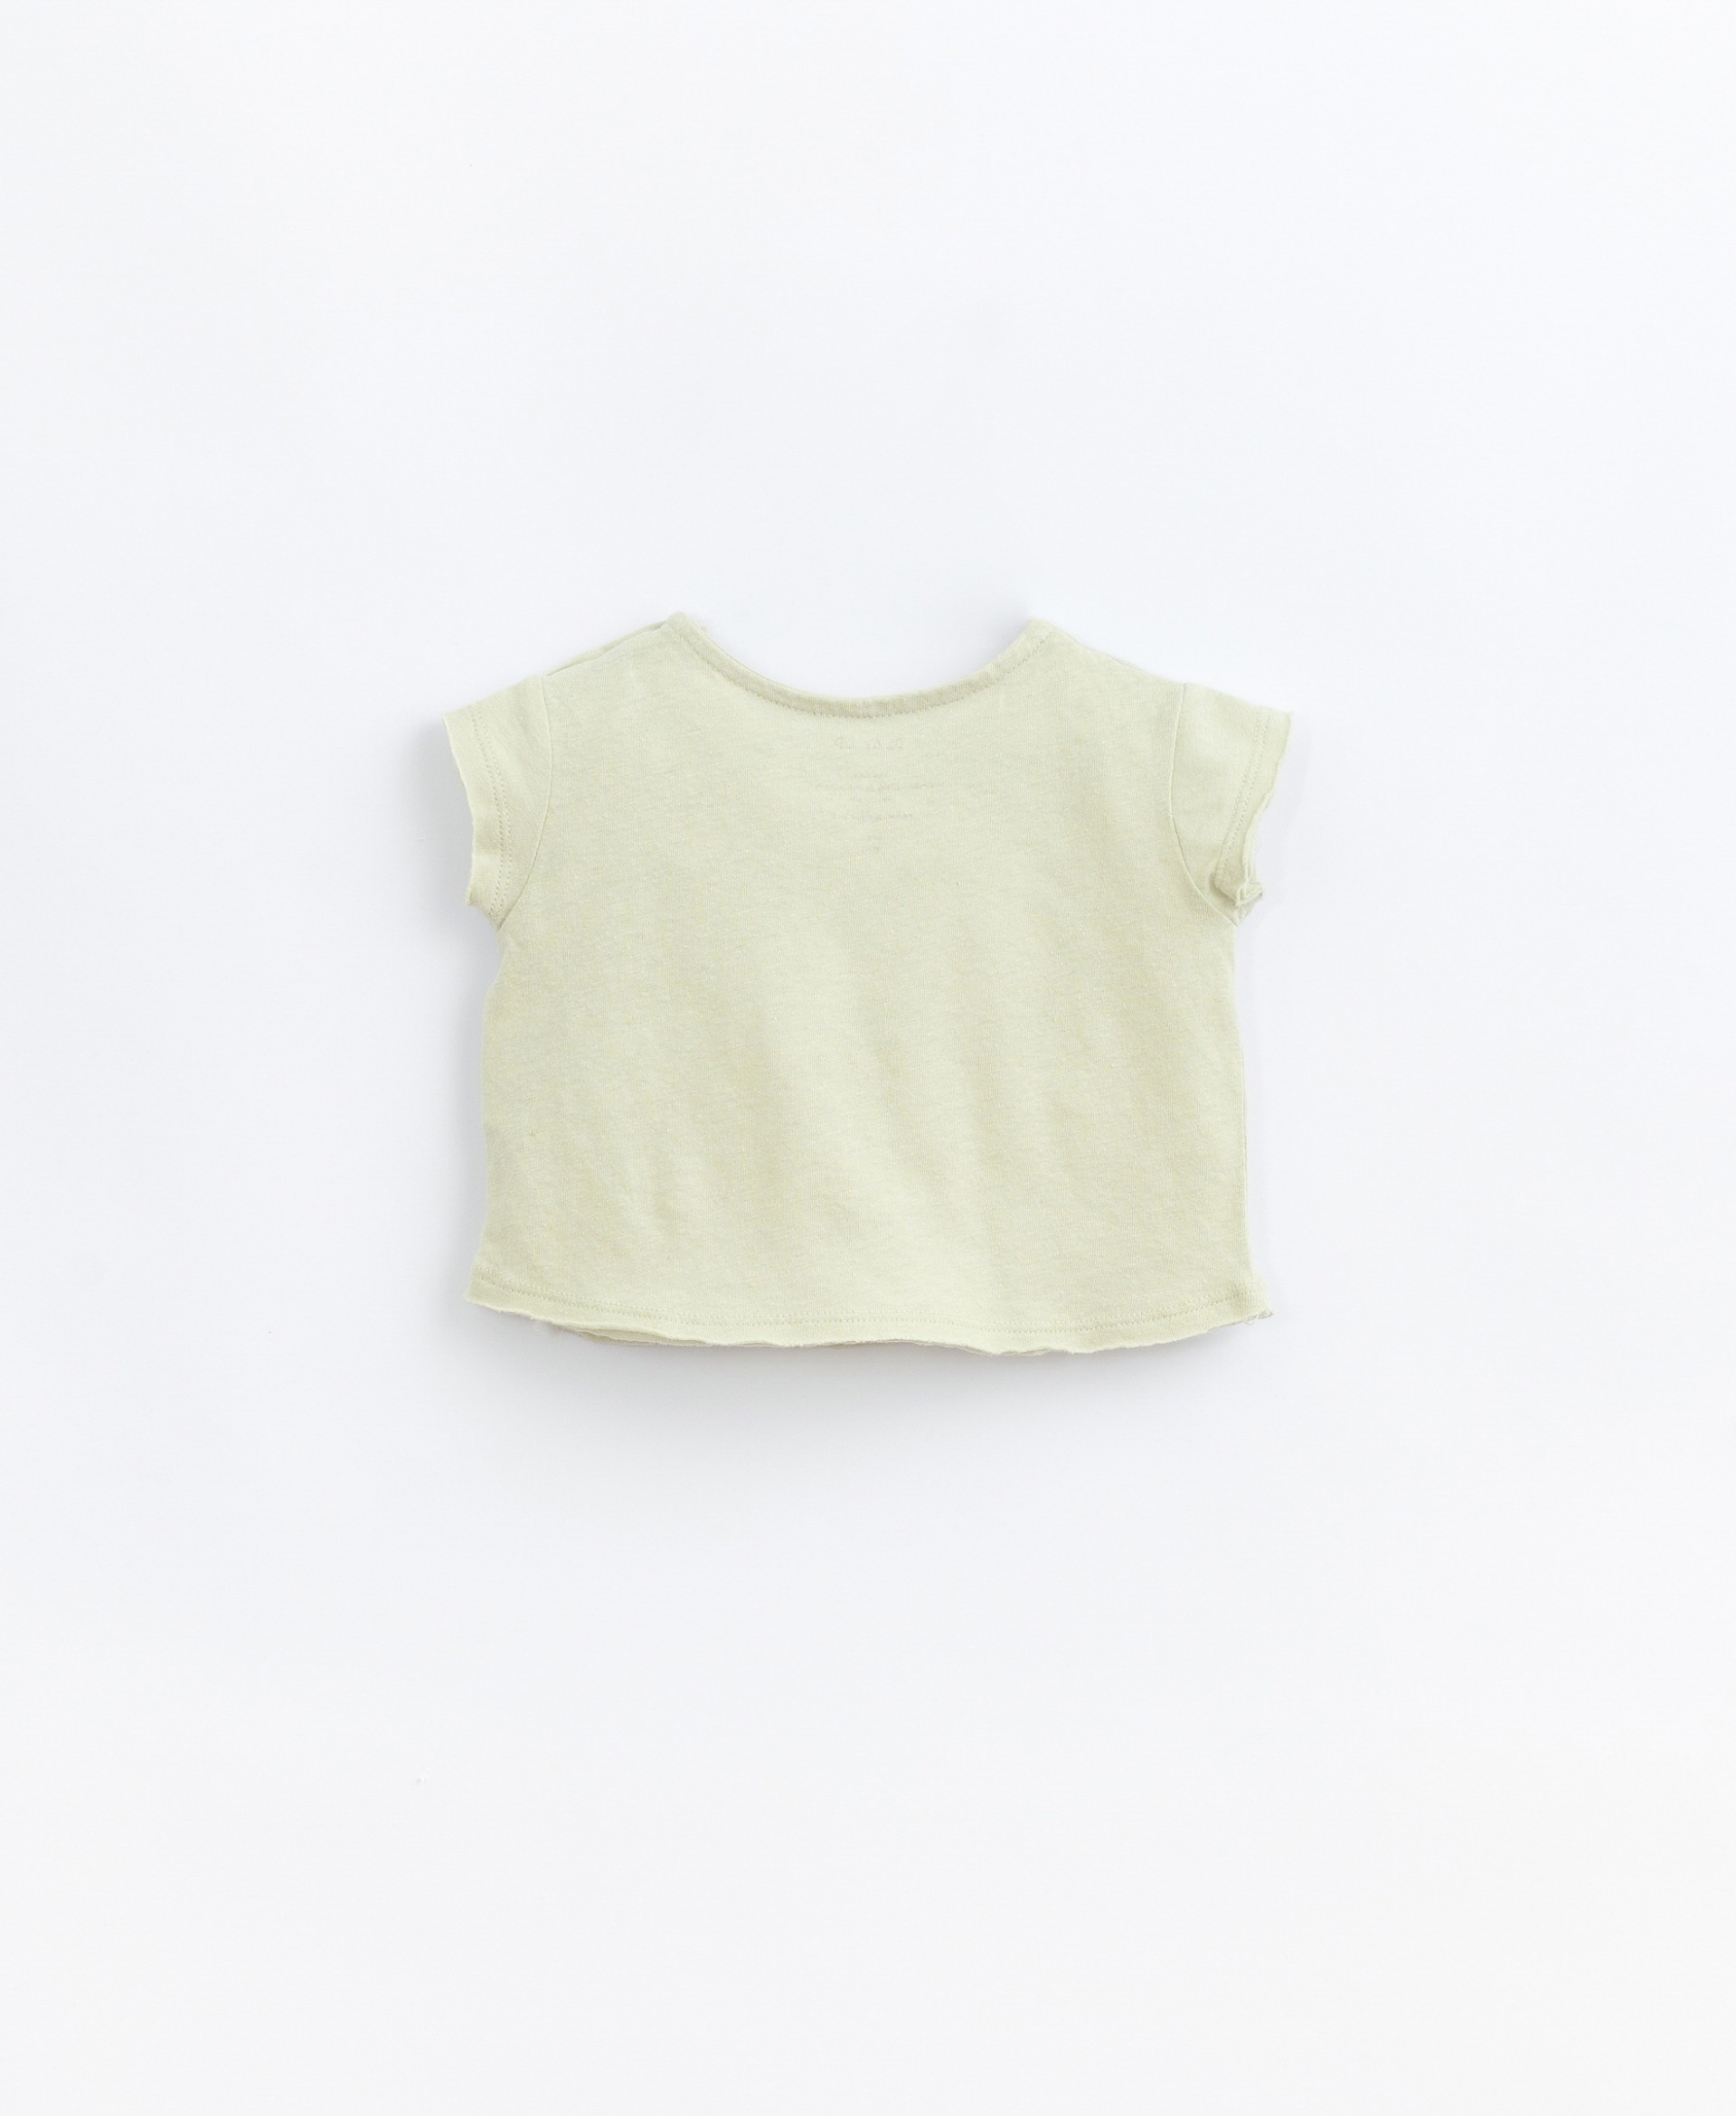 T-shirt with in-set detail on bodice | Basketry